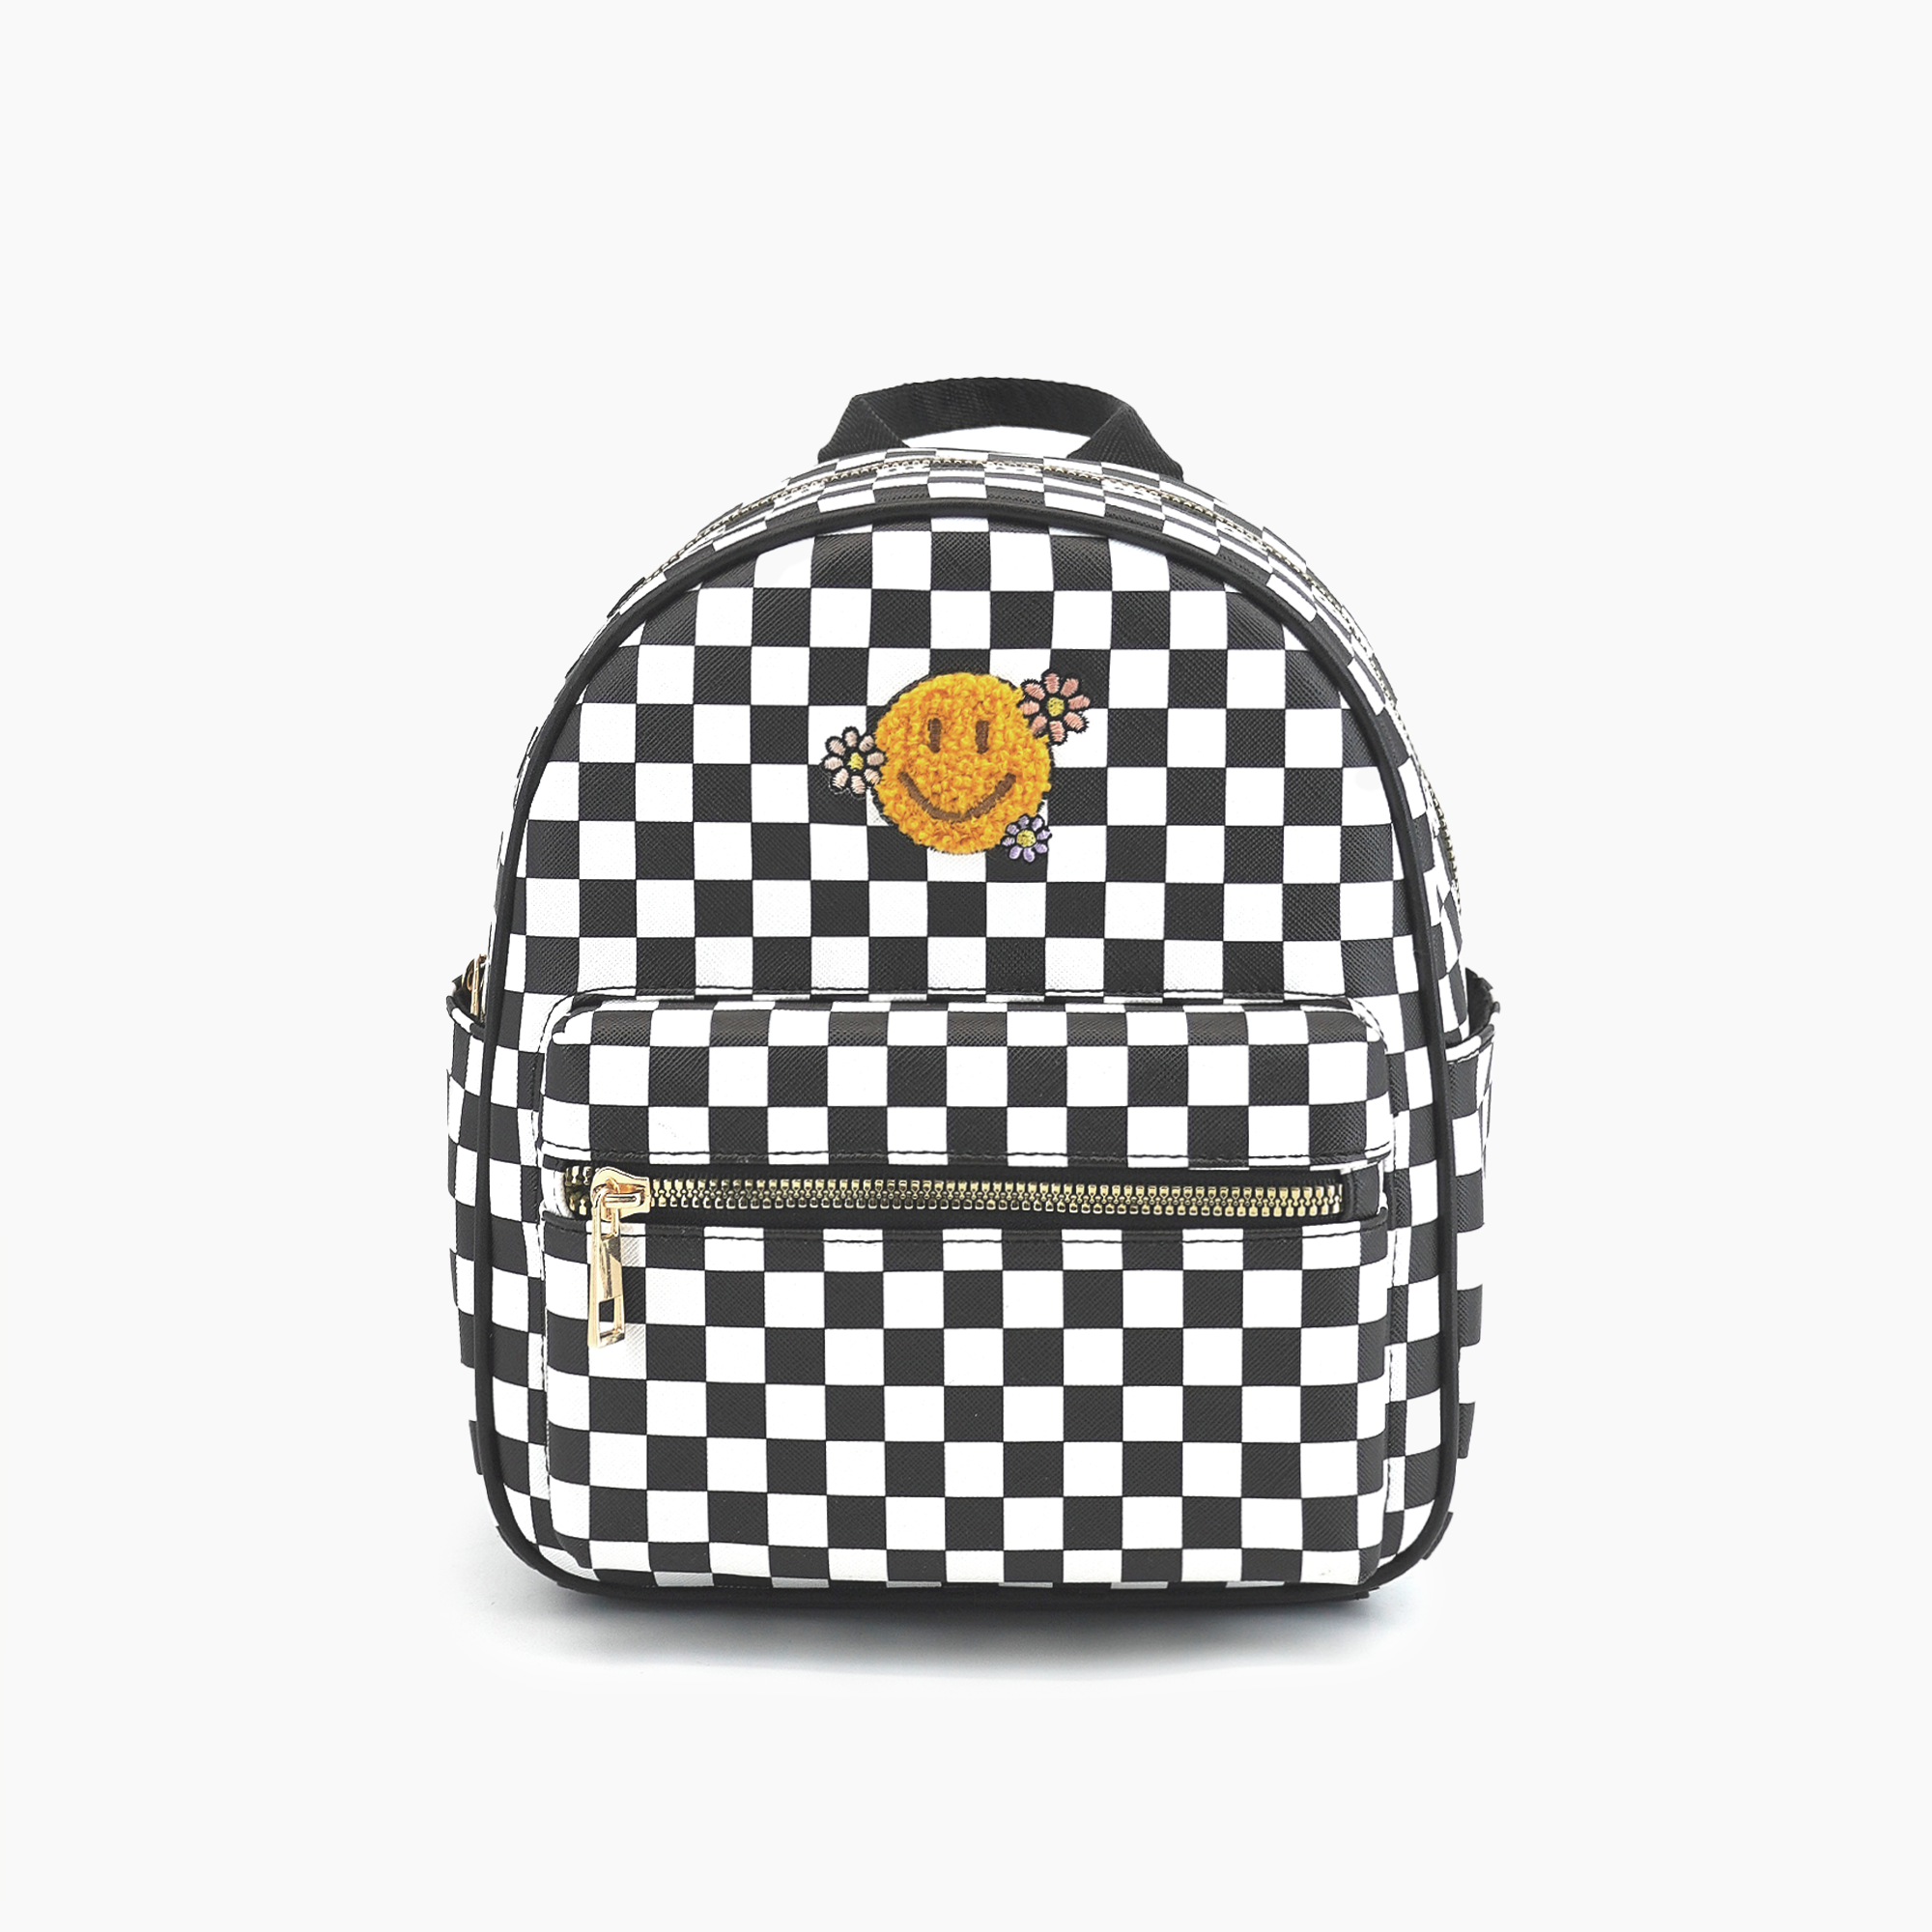 Smiley Checkered Charm Backpack